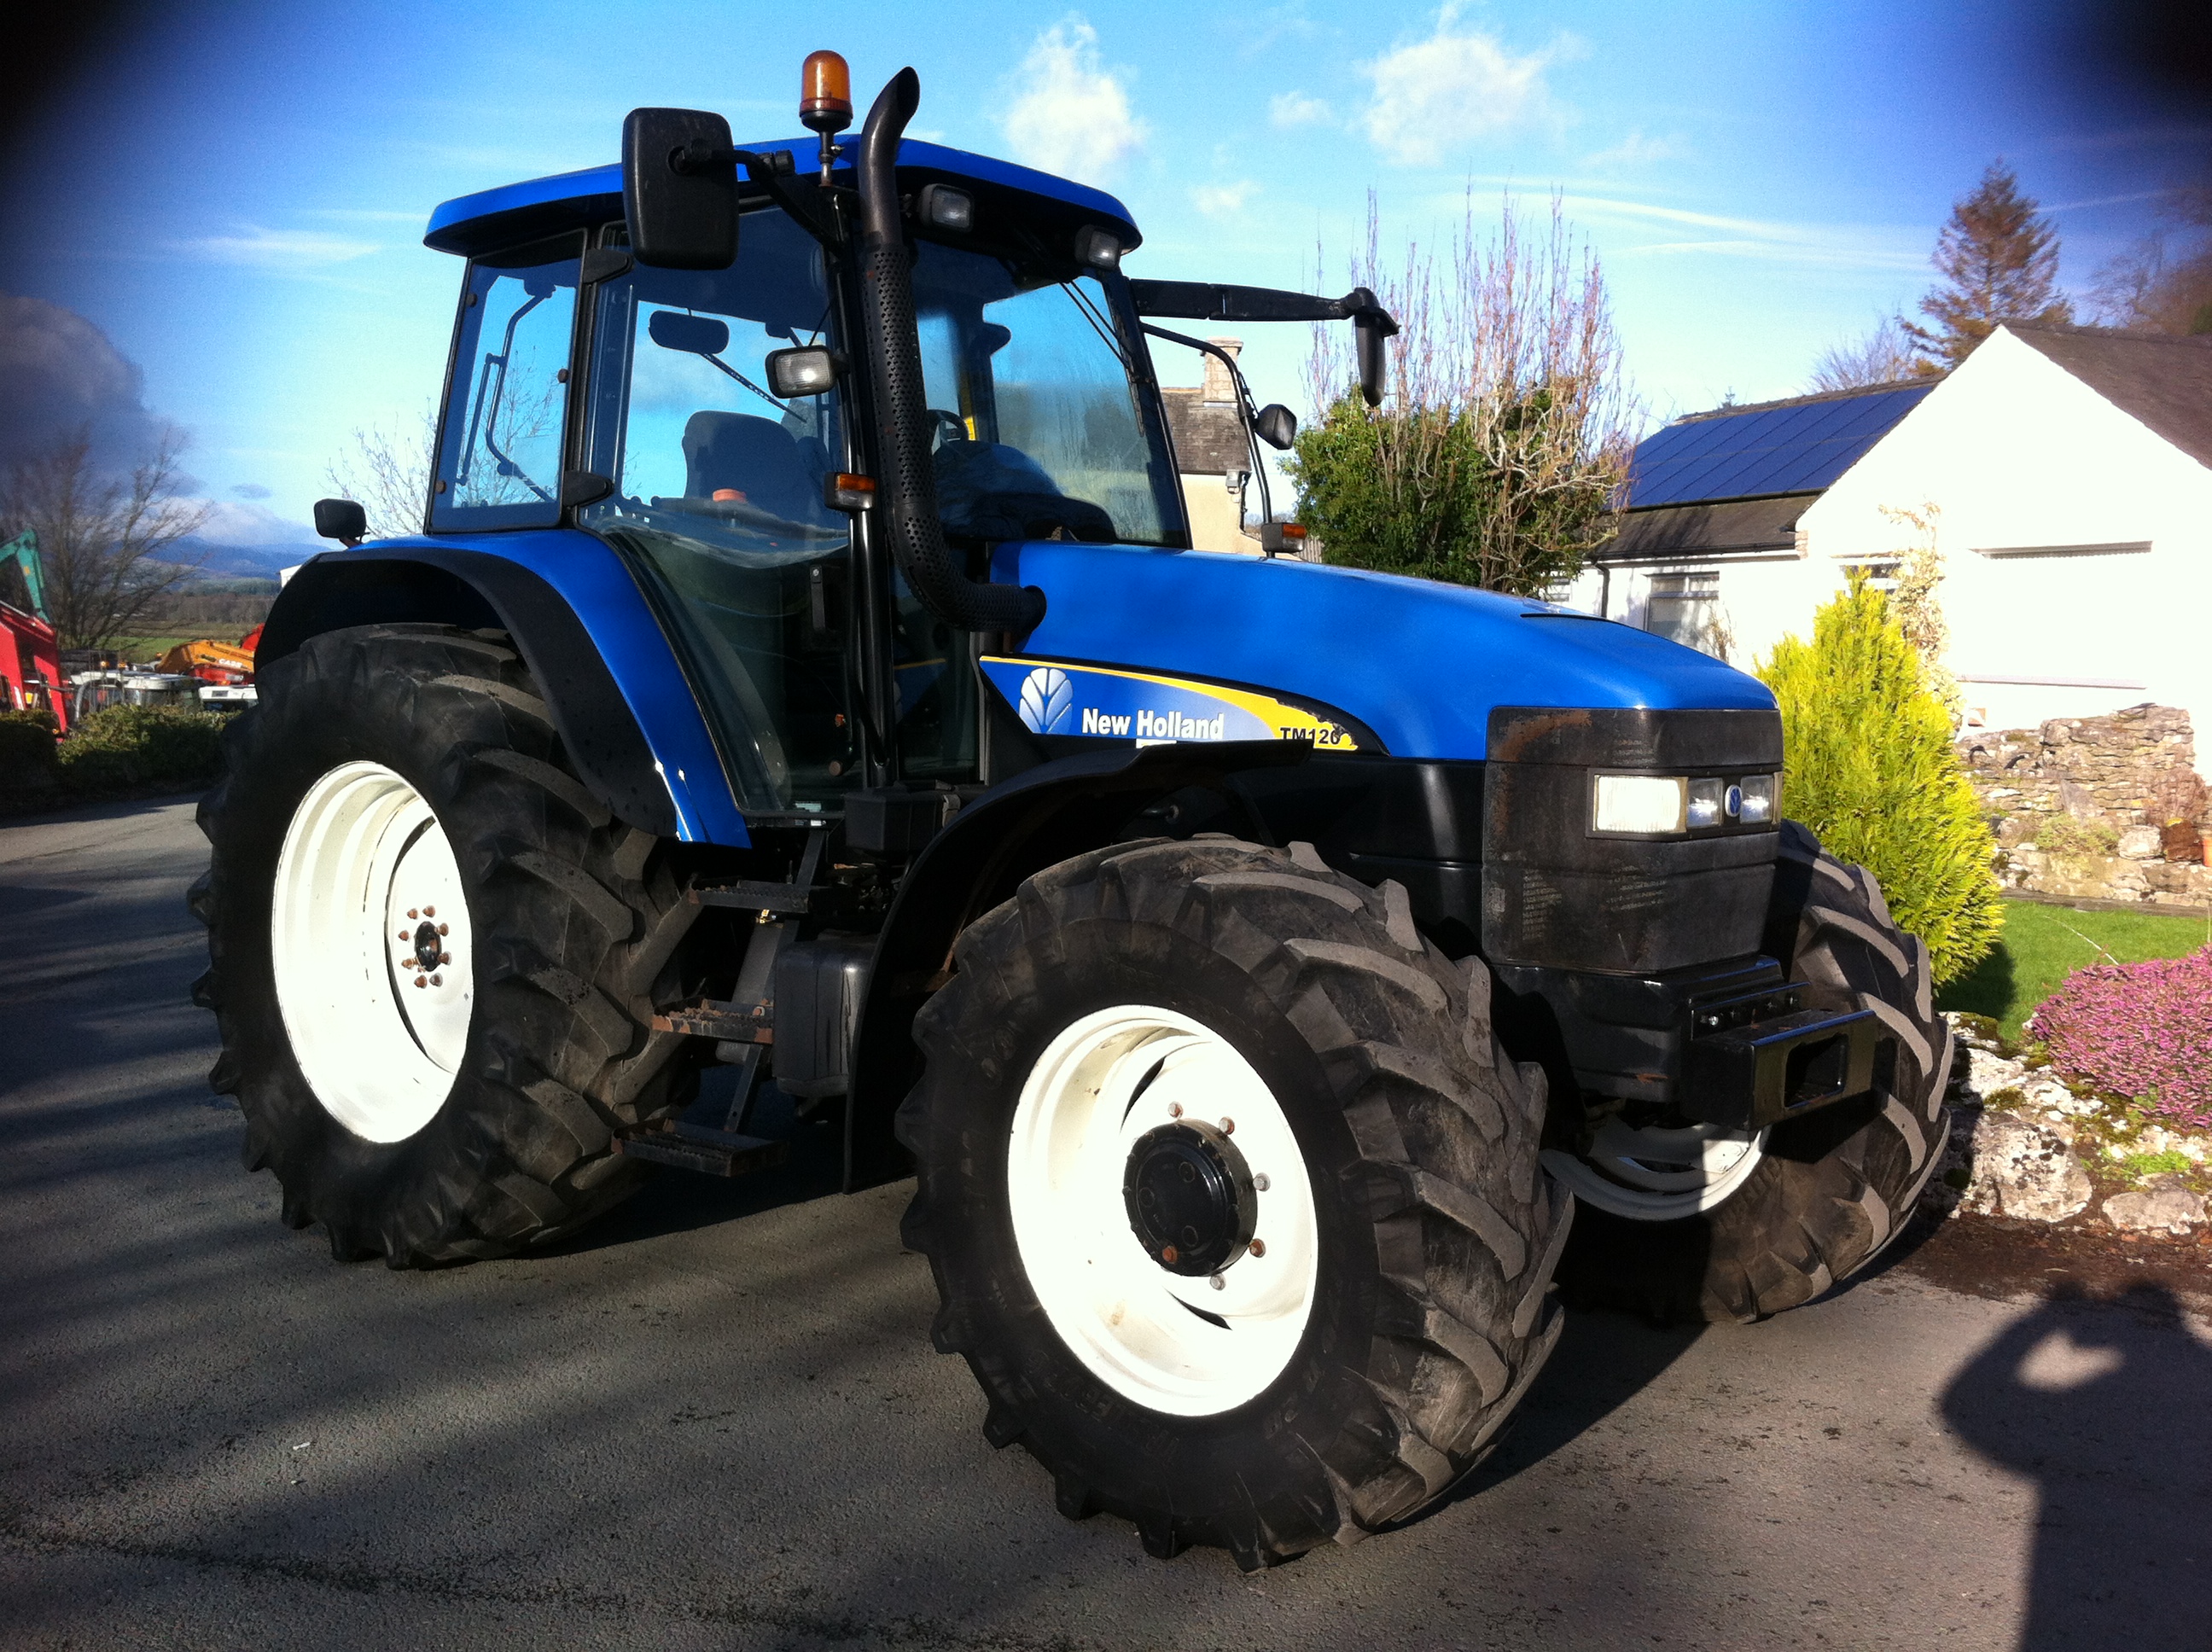 New Holland TM120 for sale - Price: $24,305, Year: 2004 | Used New ...